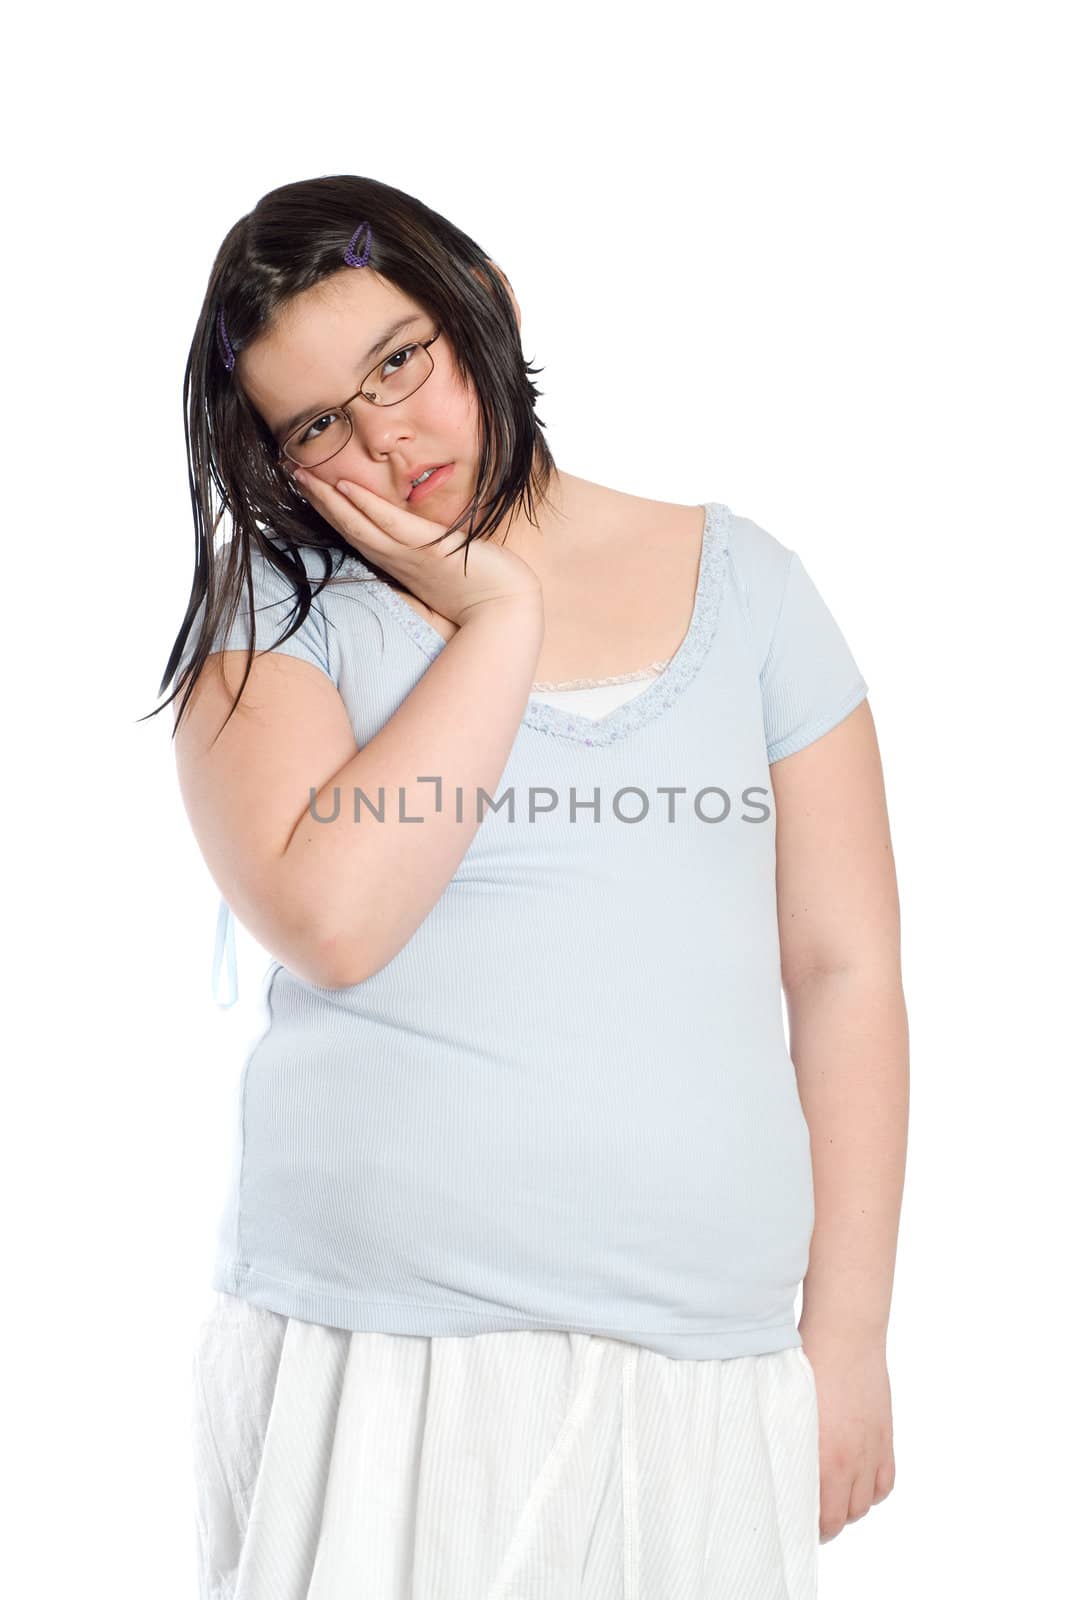 A young girl standing with her hand on her mouth, suffering from a sore tooth, isolated against a white backround